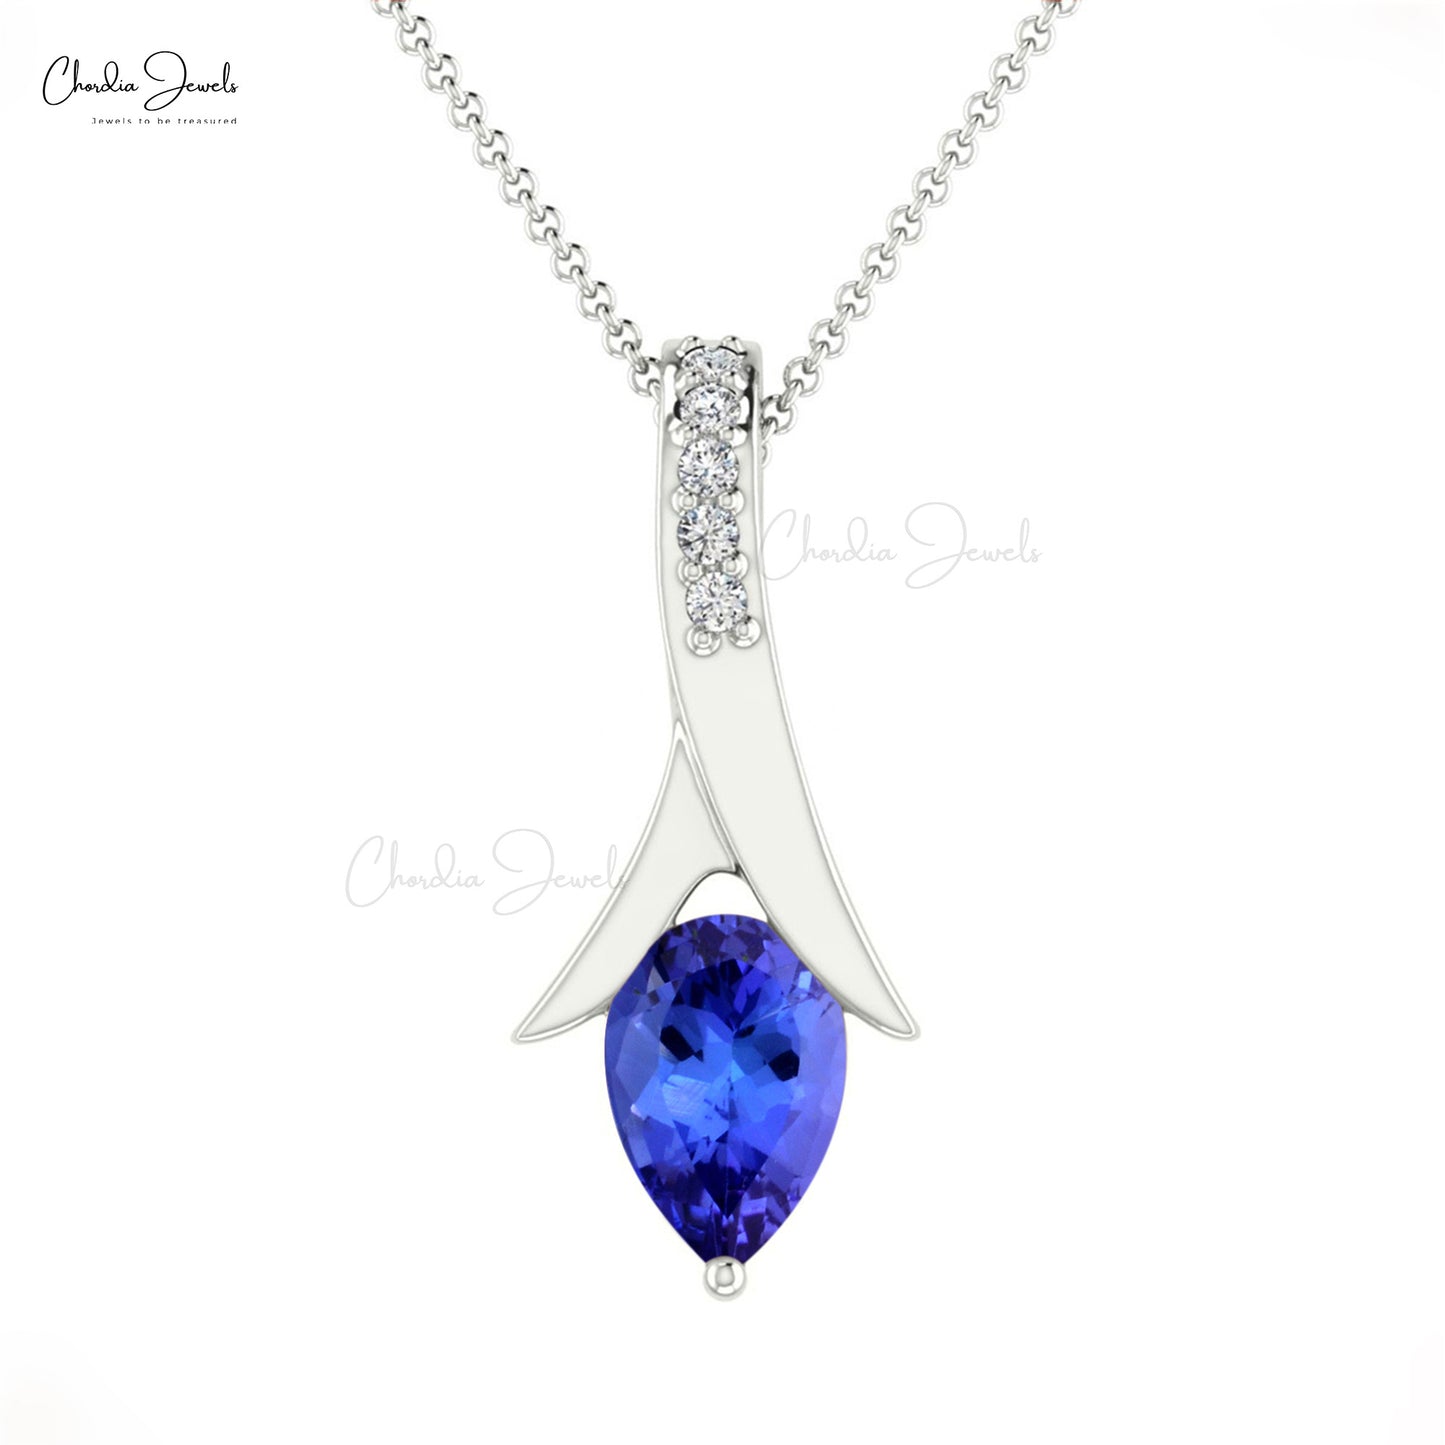 Load image into Gallery viewer, Natural Tanzanite and White Diamond Teardrop Pendant Necklace 14k Solid Gold Pendant Hallmarked Jewelry For Wedding Gift
